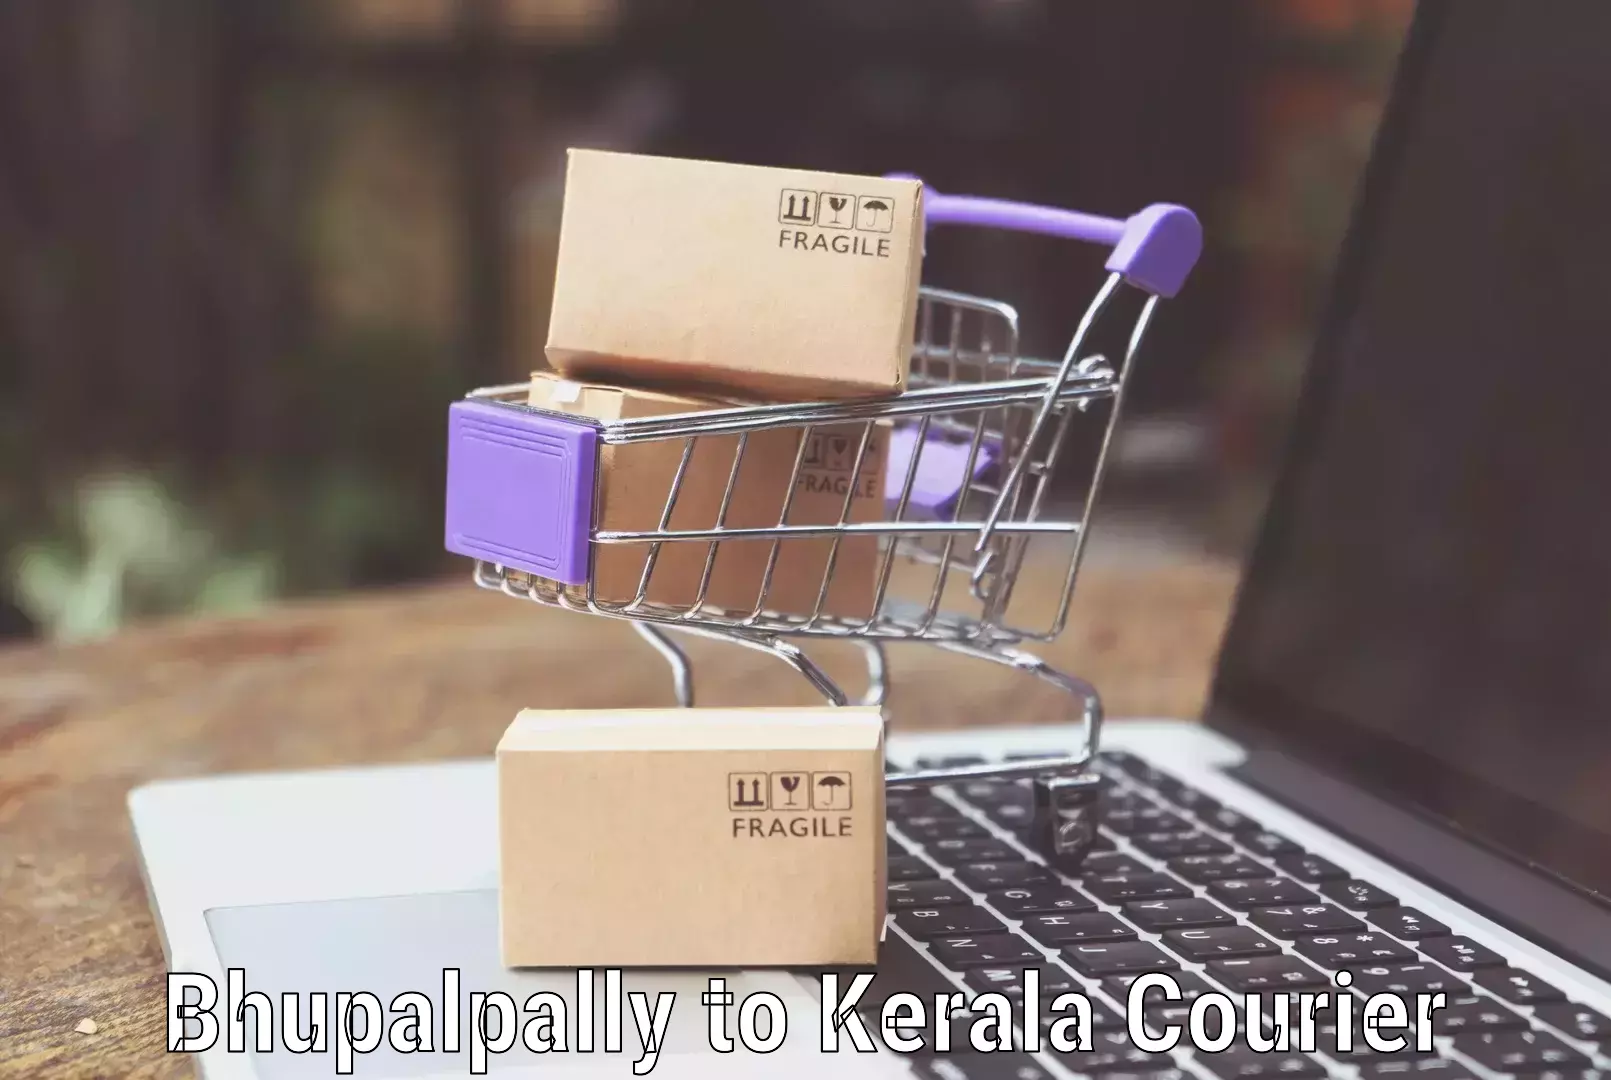 Luggage delivery solutions Bhupalpally to Cochin Port Kochi